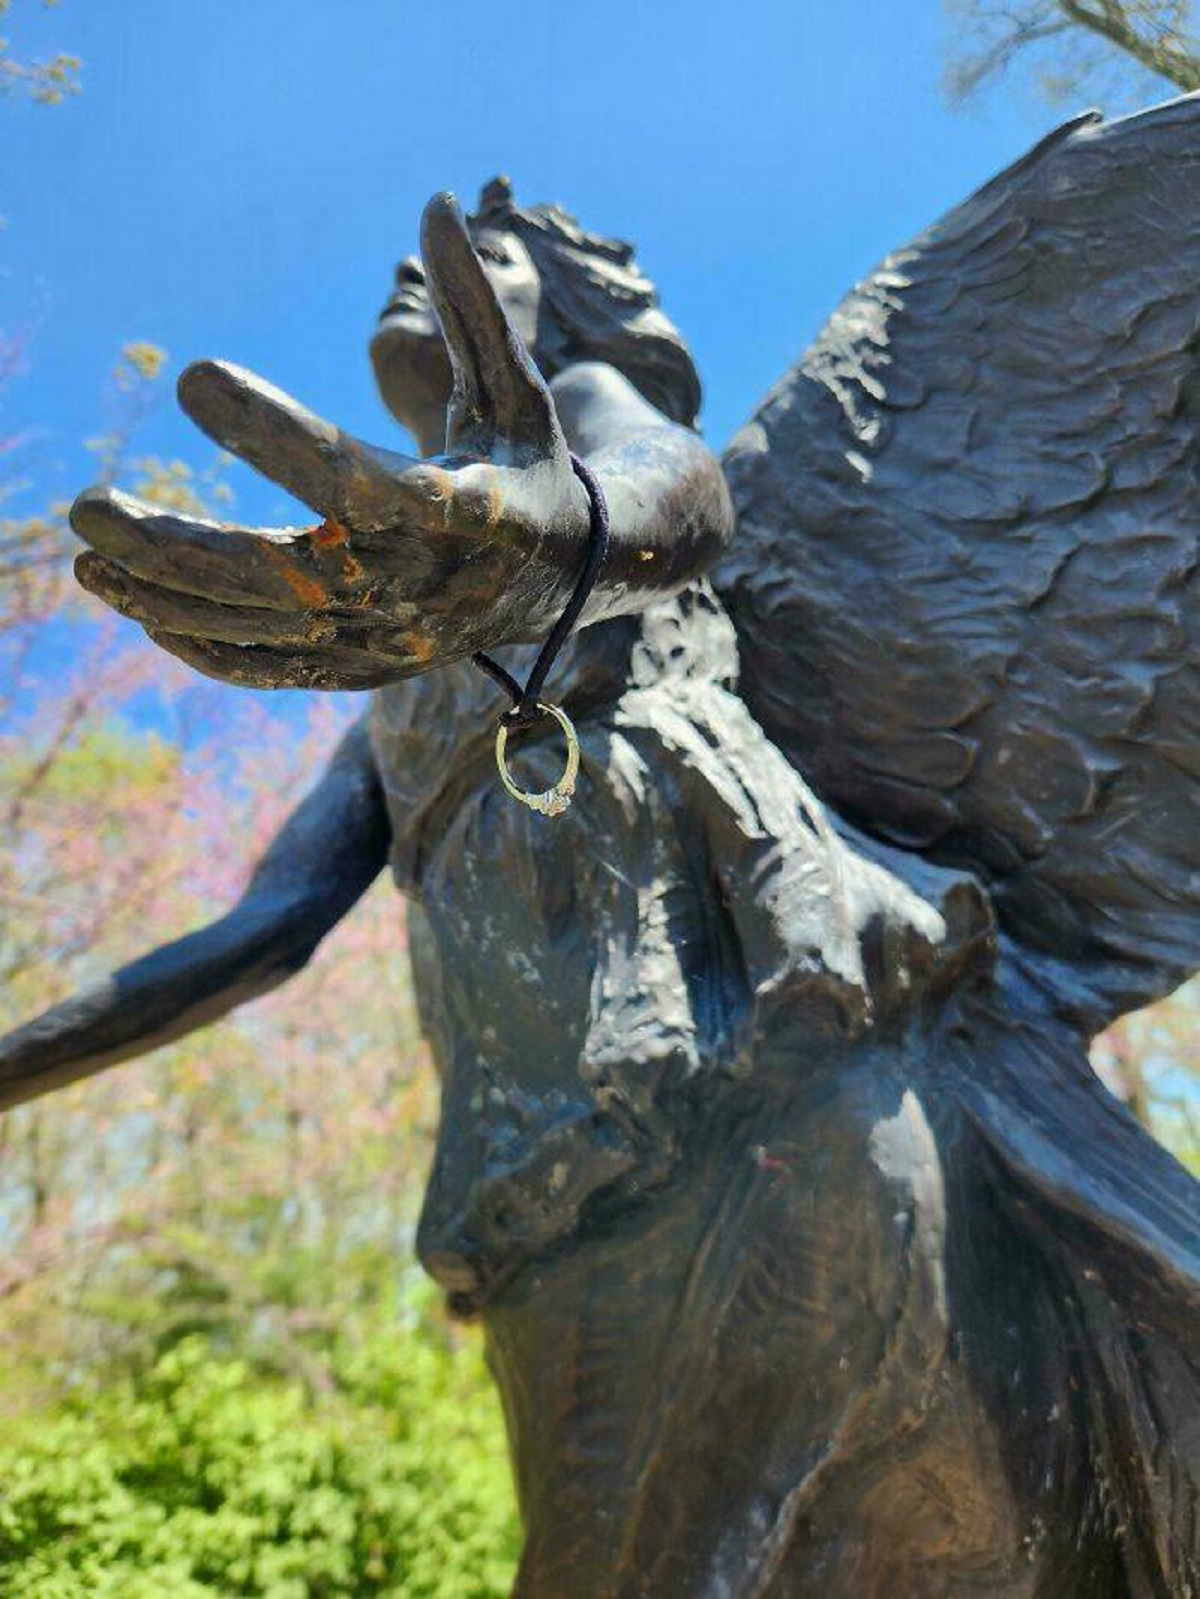 "This Engagement Ring I Found Attached To A Statue At The Park"